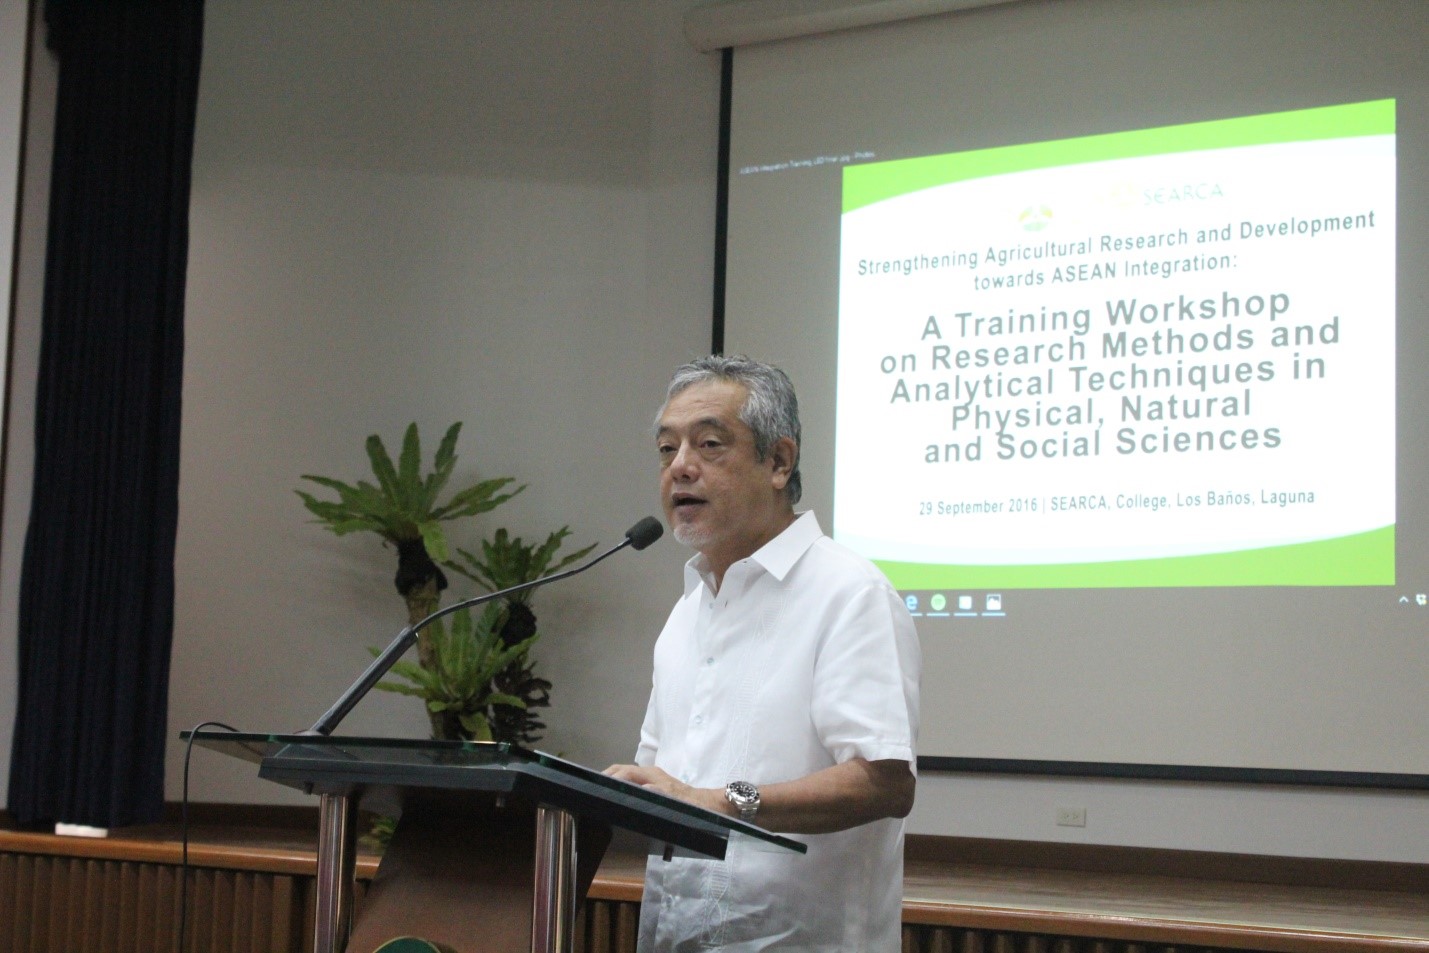 Dr. Gil C. Saguiguit, Jr., SEARCA Director, delivering his welcoming remarks during the training